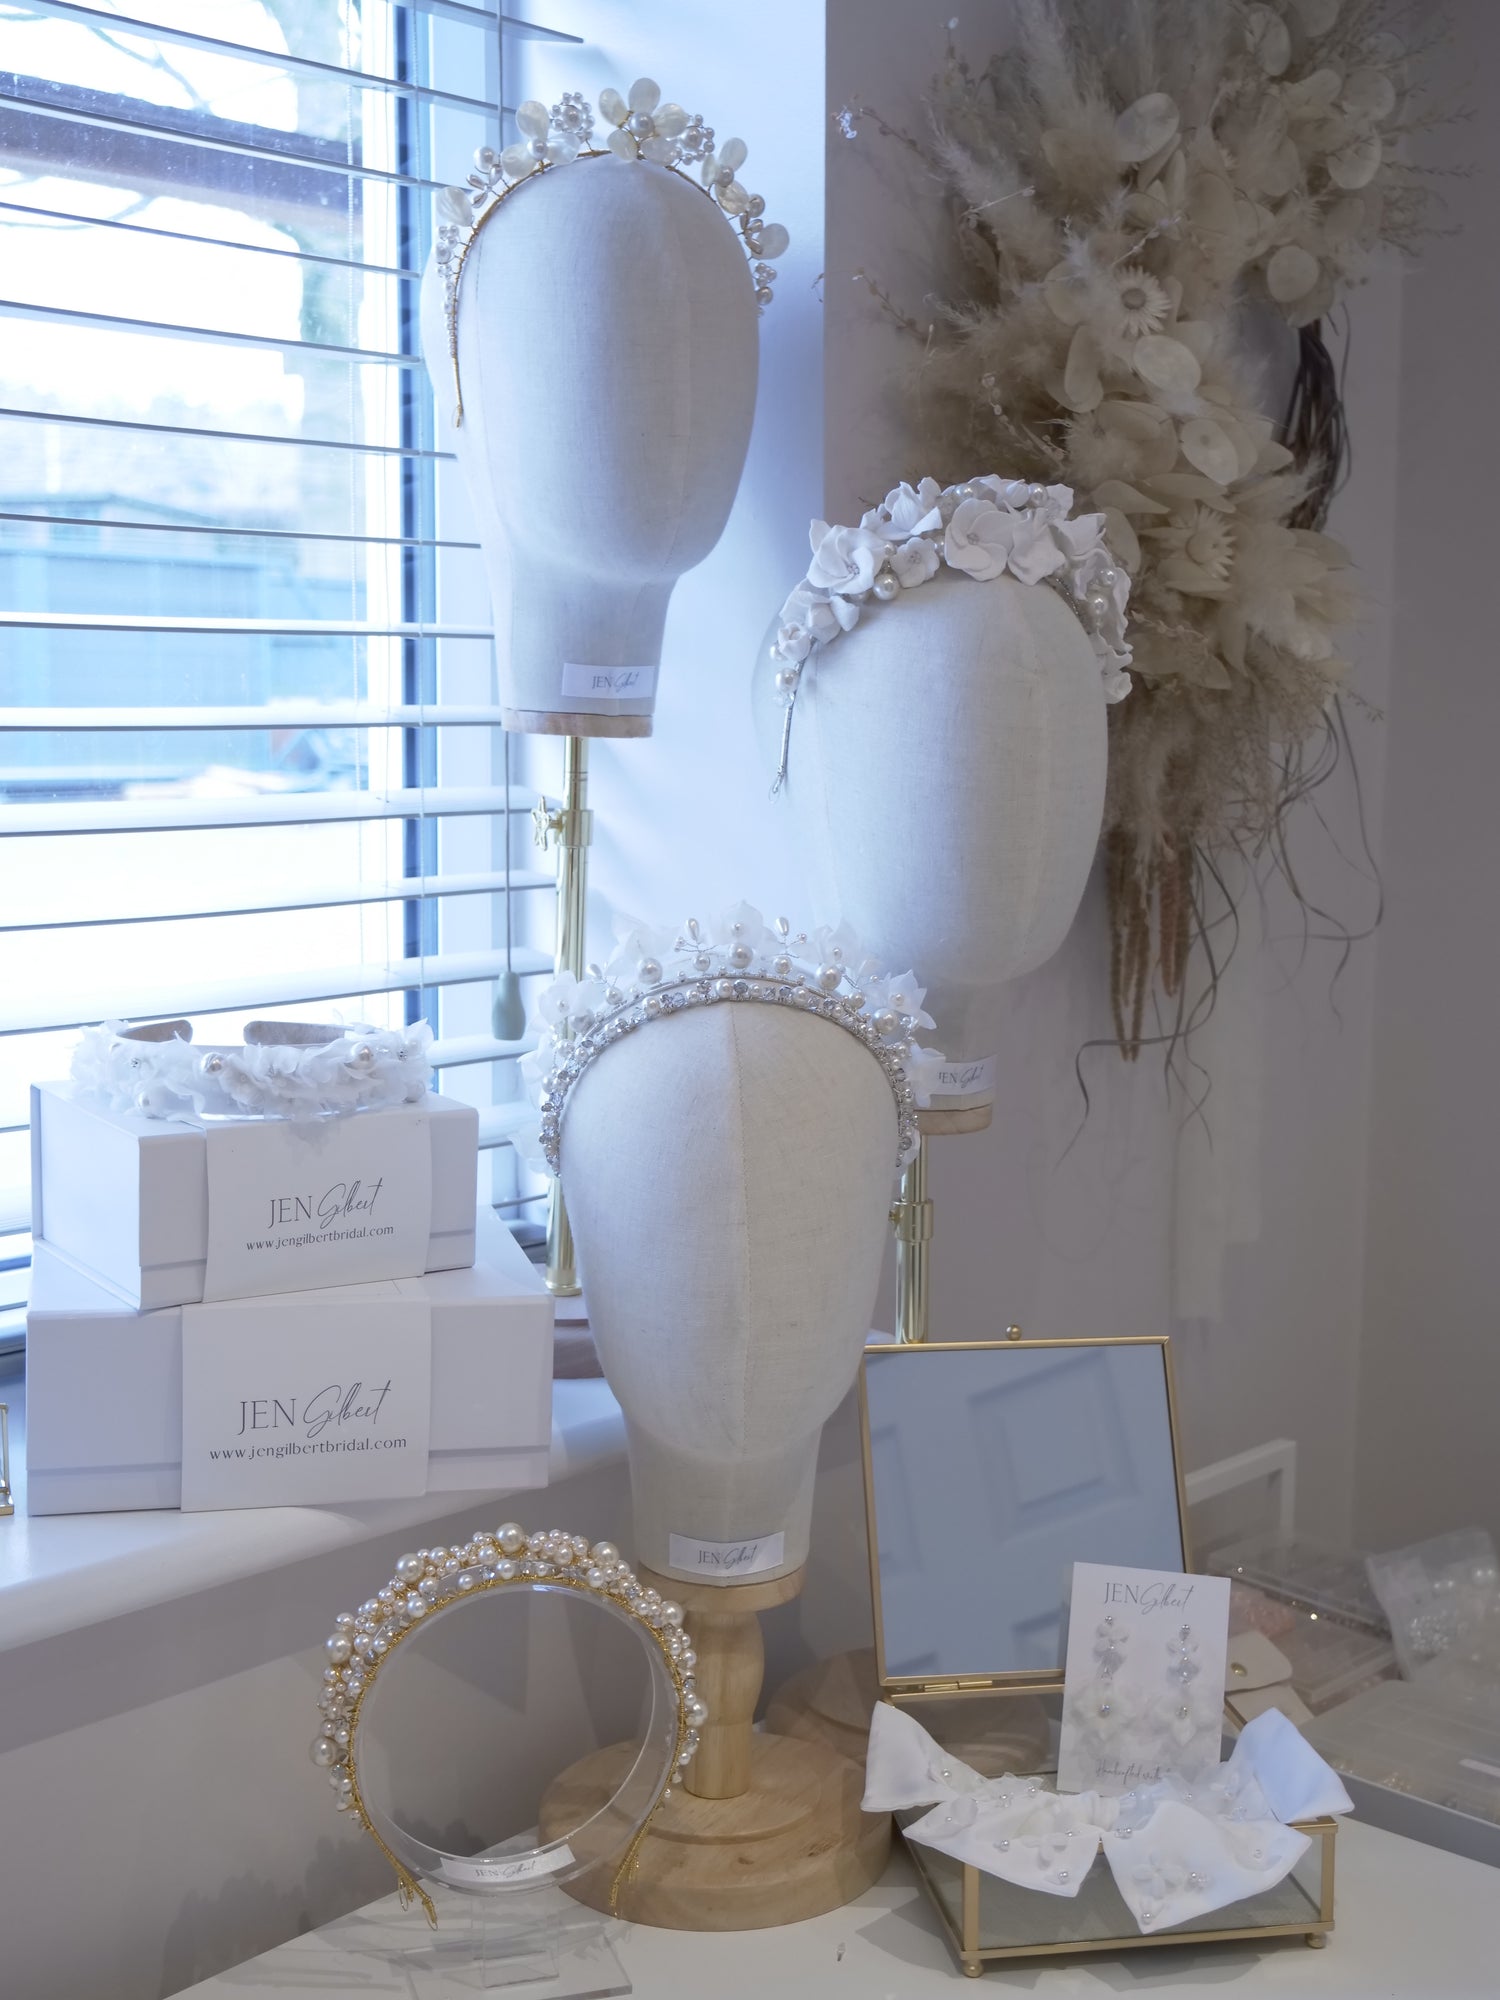 Exclusive Accessory Appointment at Jen Gilbert's Designer Studio